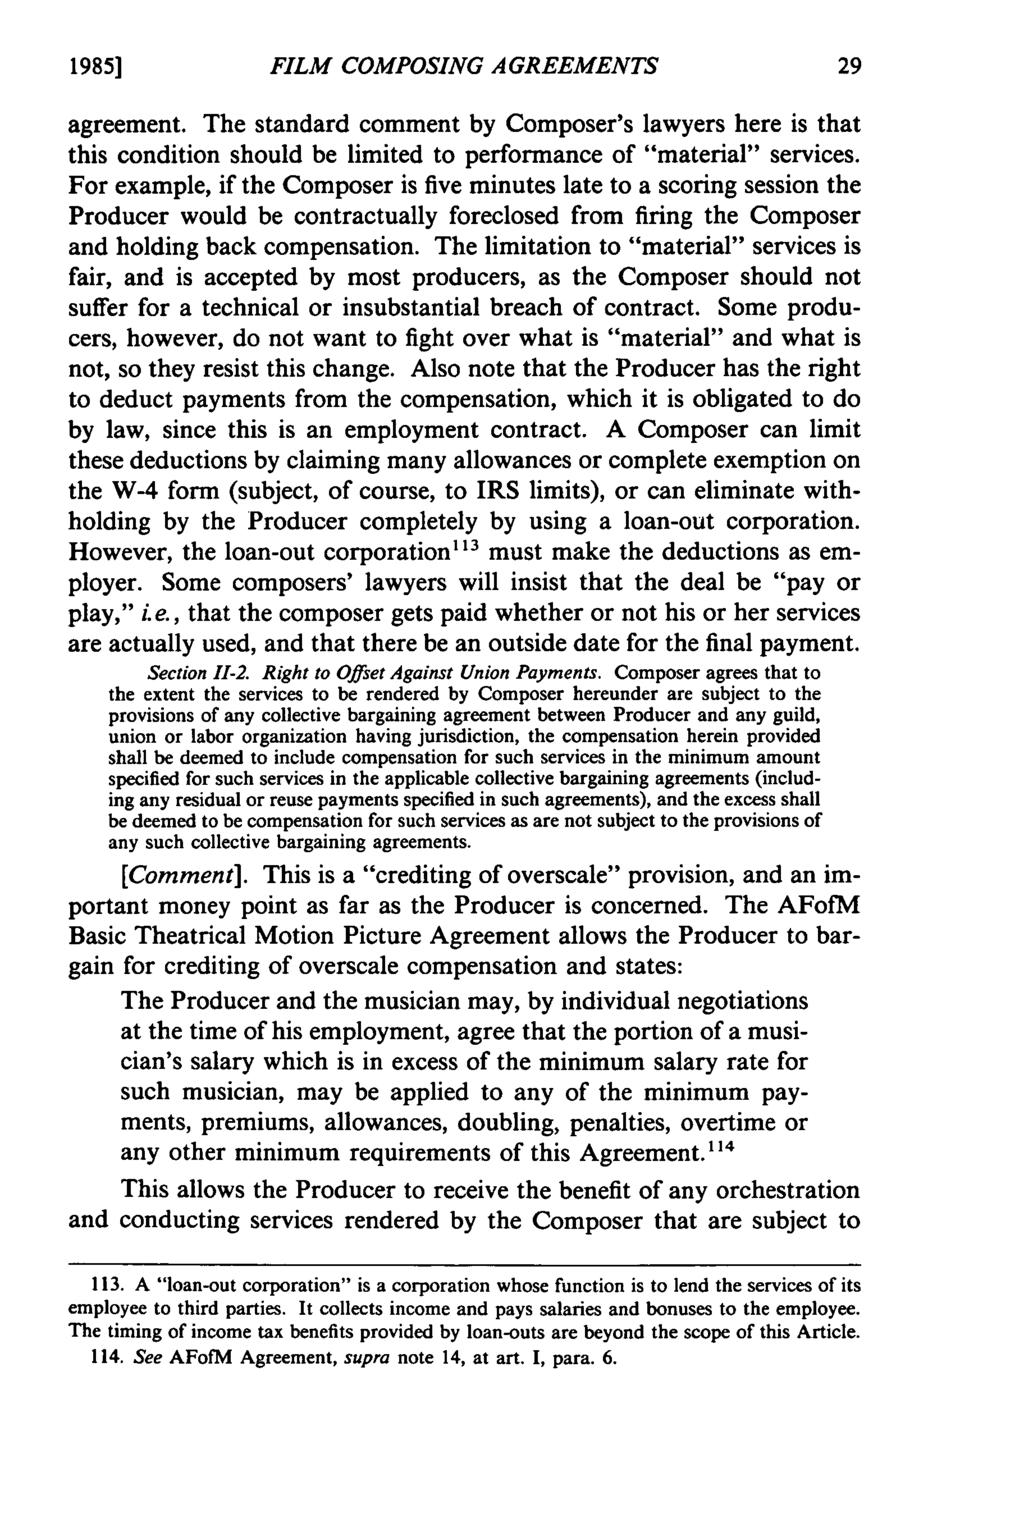 1985] FILM COMPOSING AGREEMENTS agreement. The standard comment by Composer's lawyers here is that this condition should be limited to performance of "material" services.